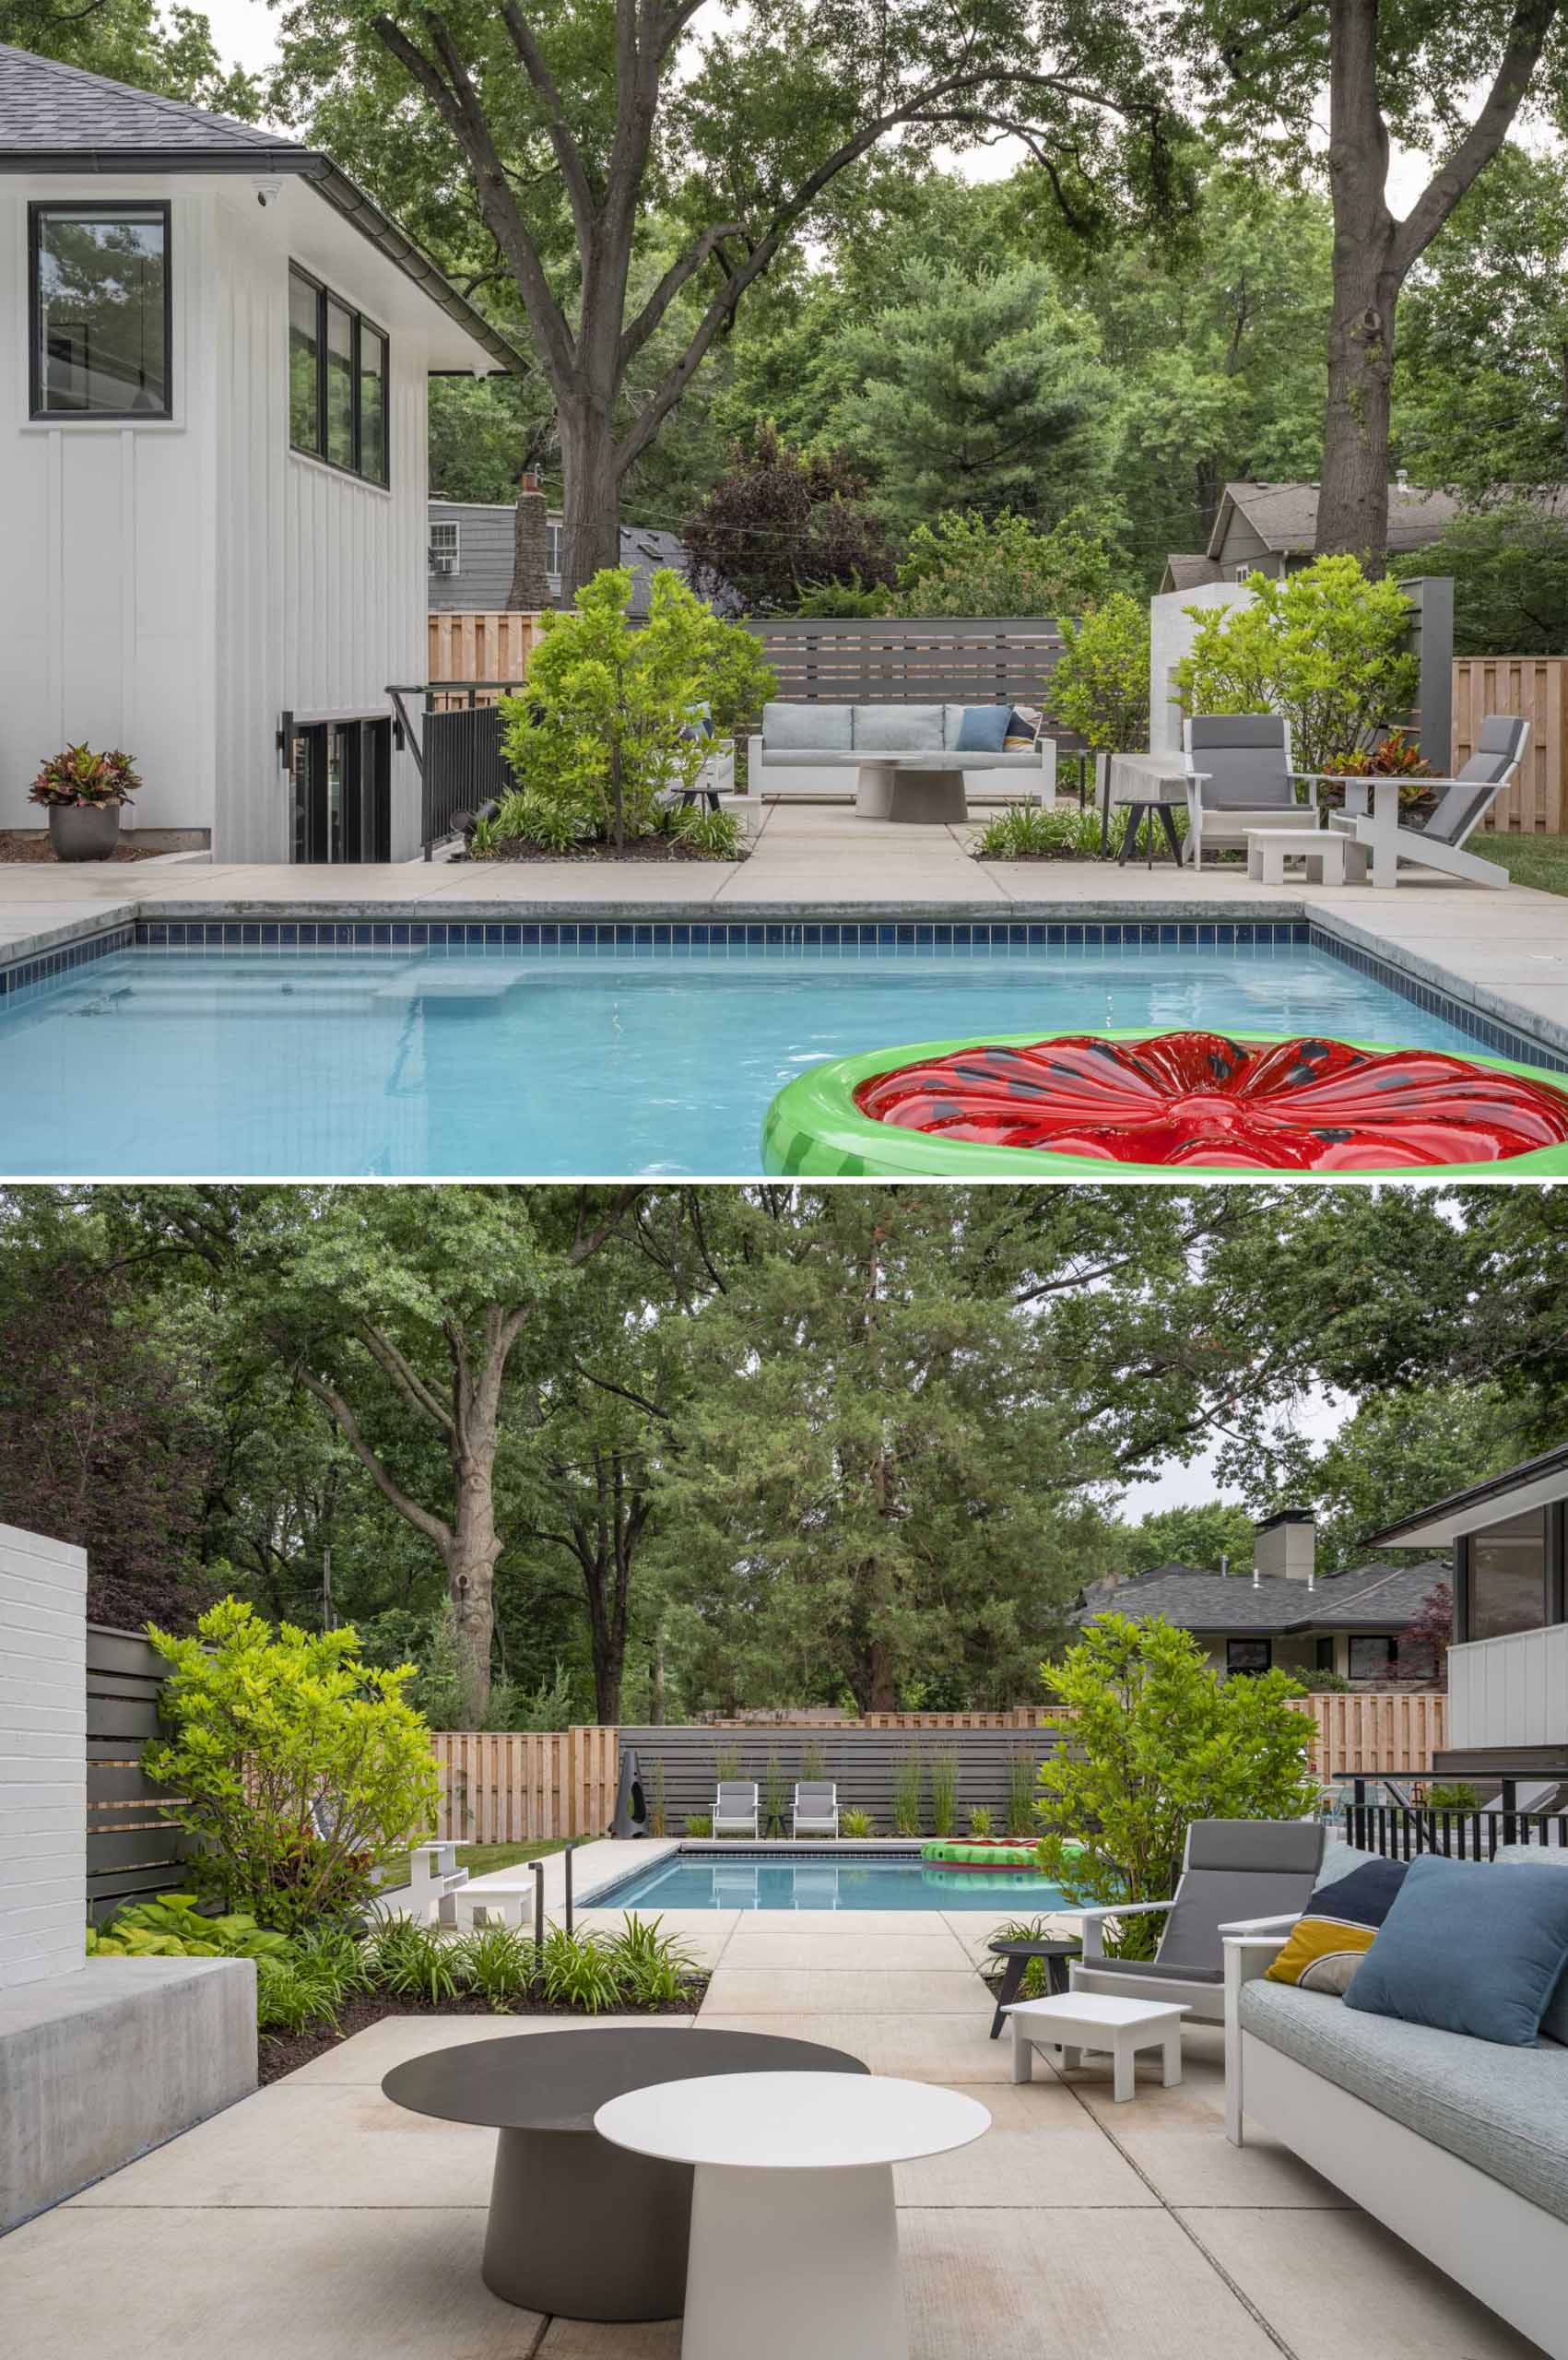 A landscaped backyard with a swimming pool and a patio furnished with plants, an outdoor lounge, and a fireplace.